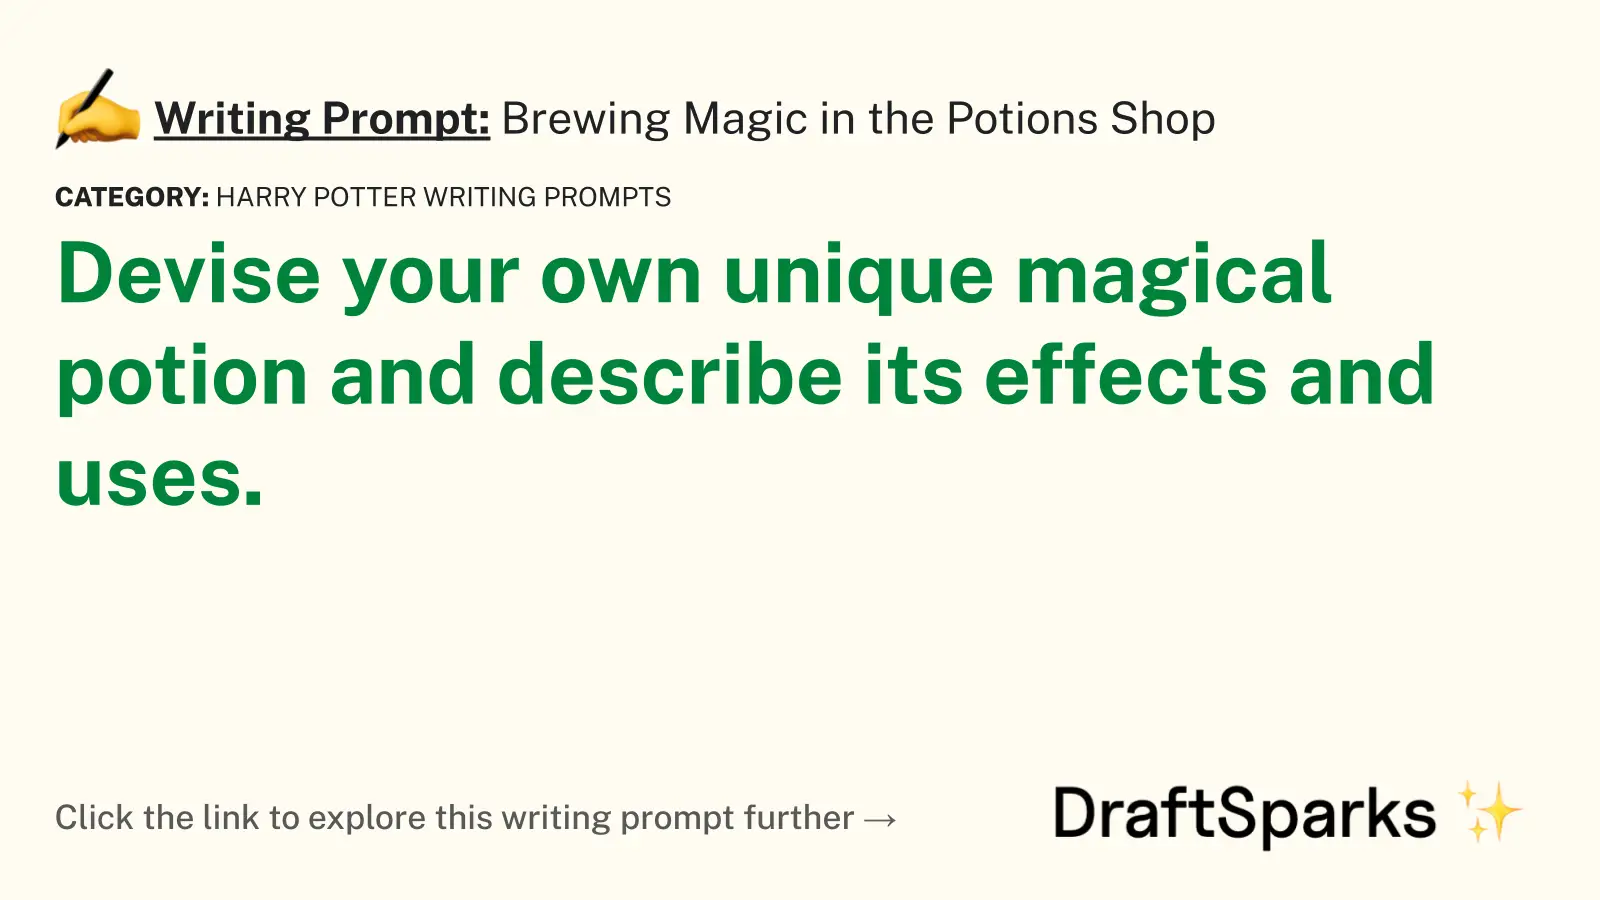 Brewing Magic in the Potions Shop